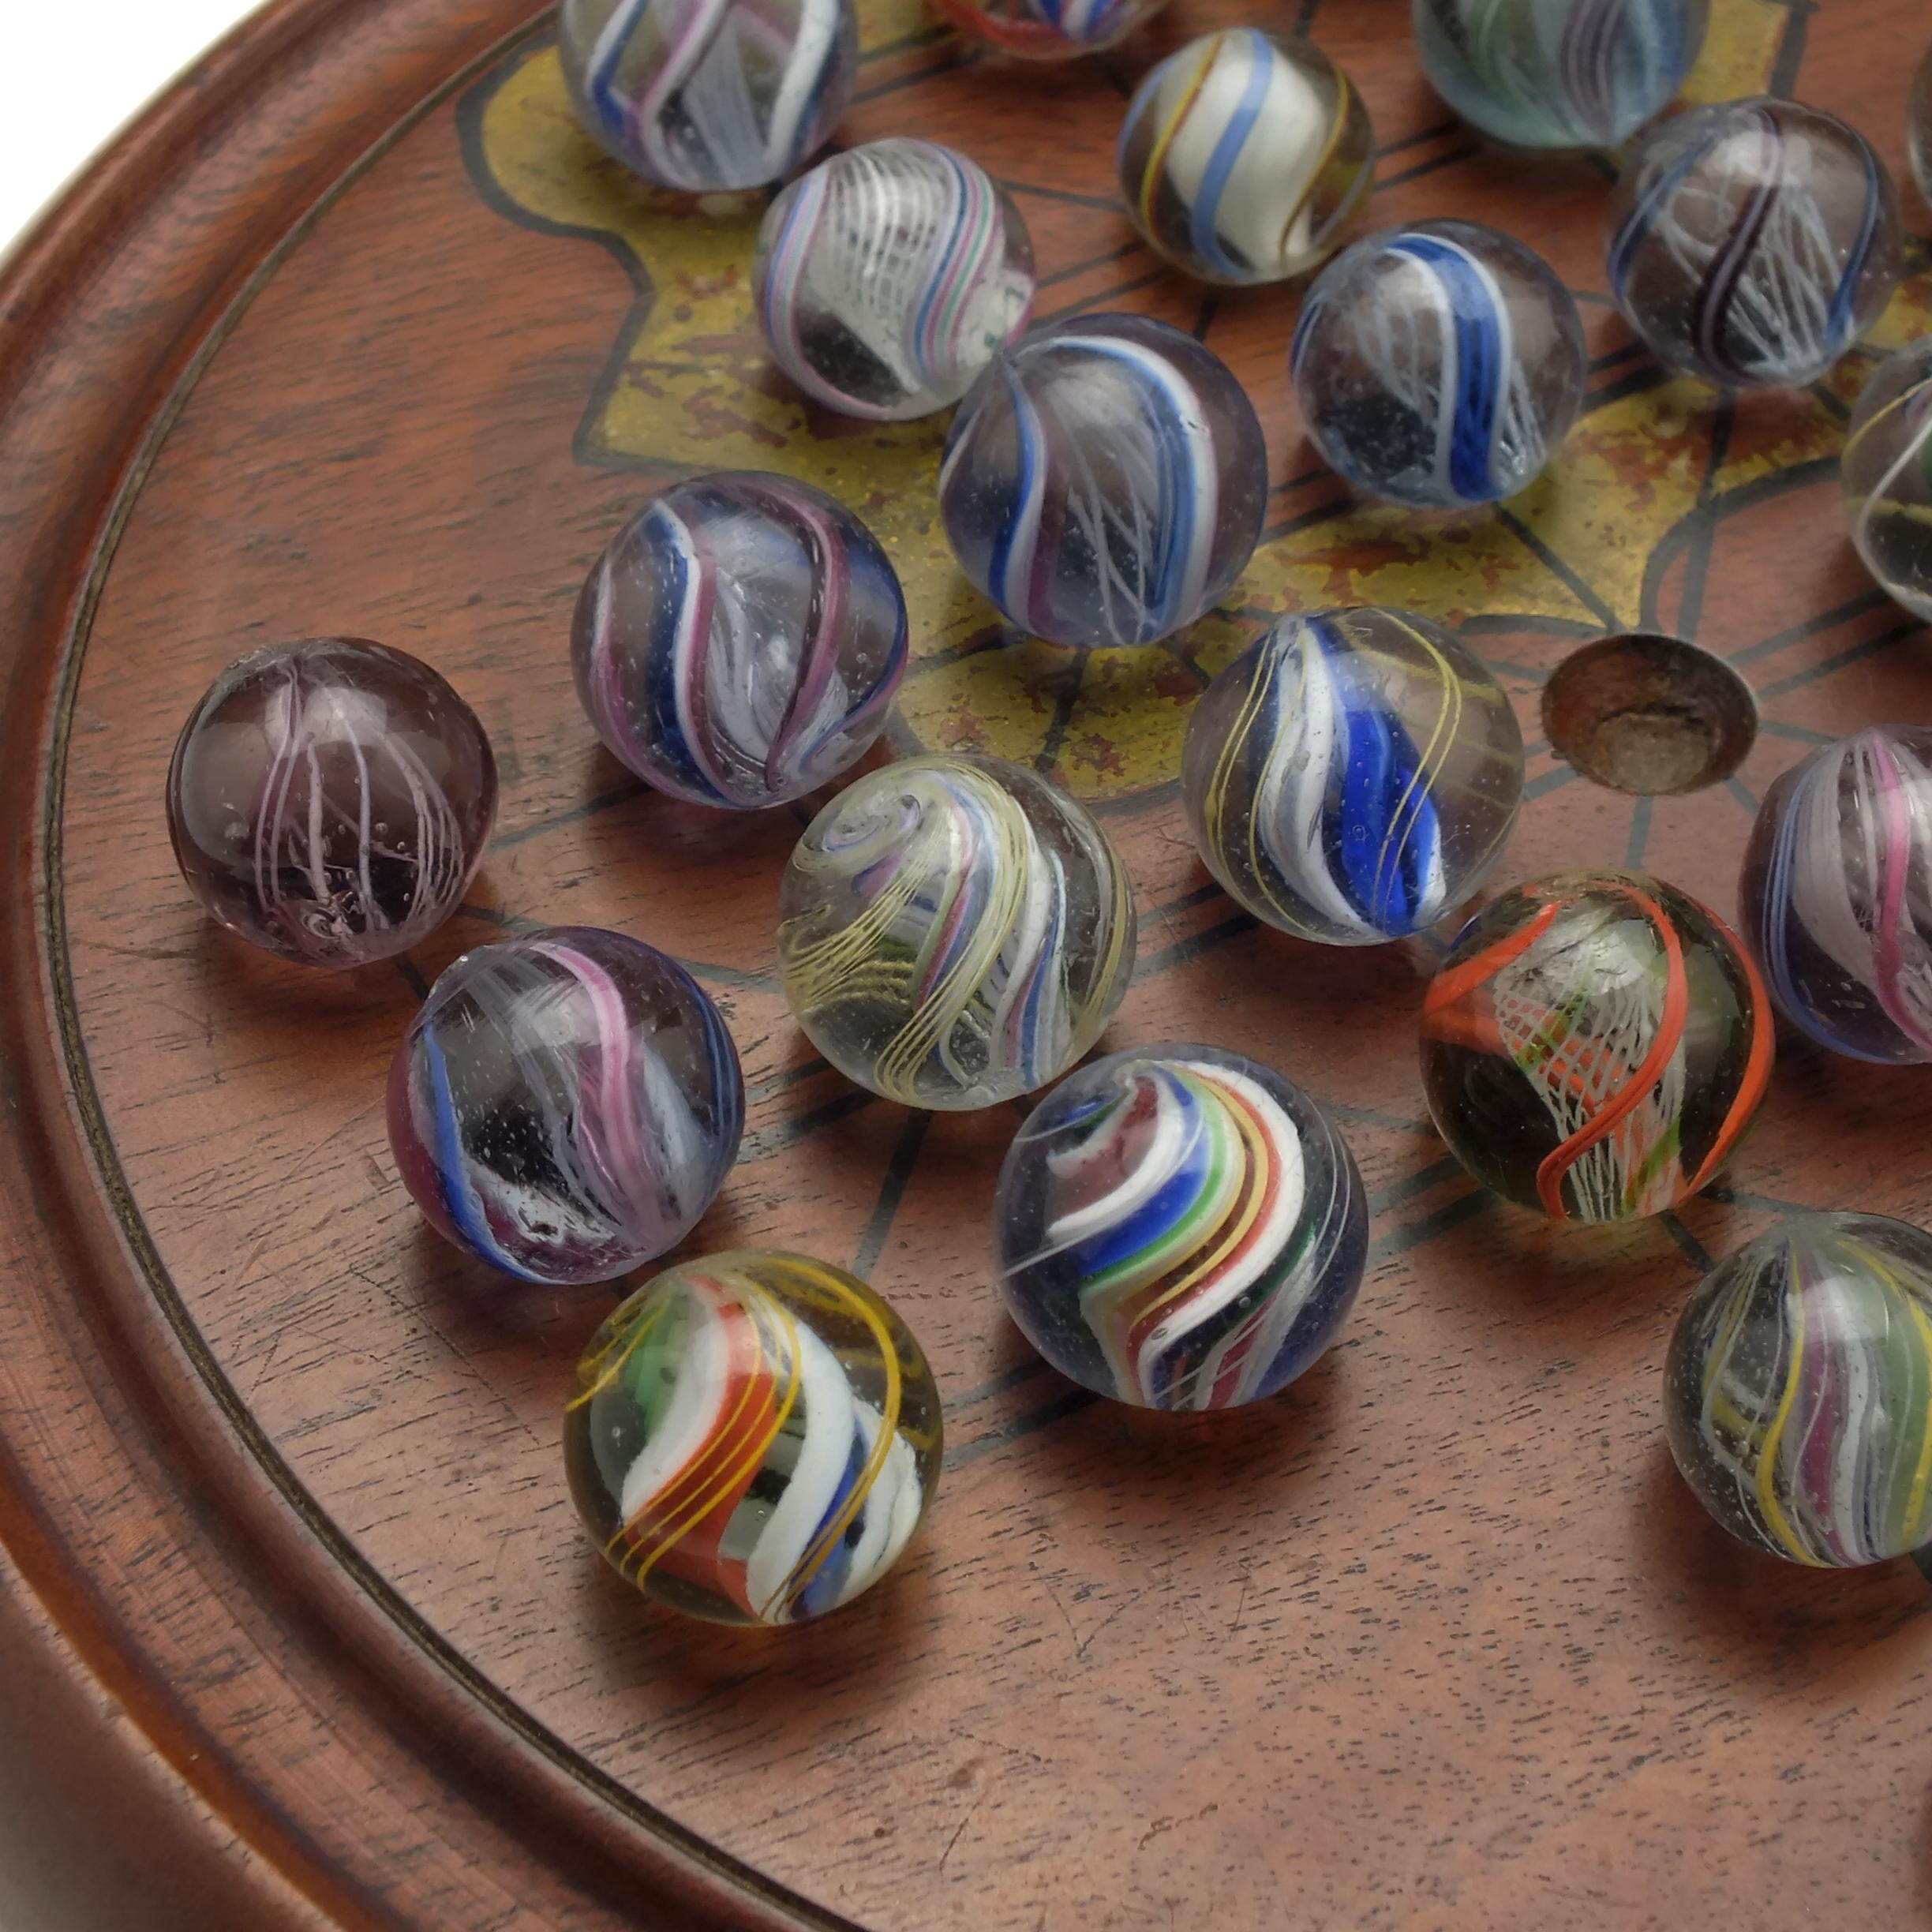 Late 19th Century Antique Solitaire Board and 19th Century German Marbles, circa 1870